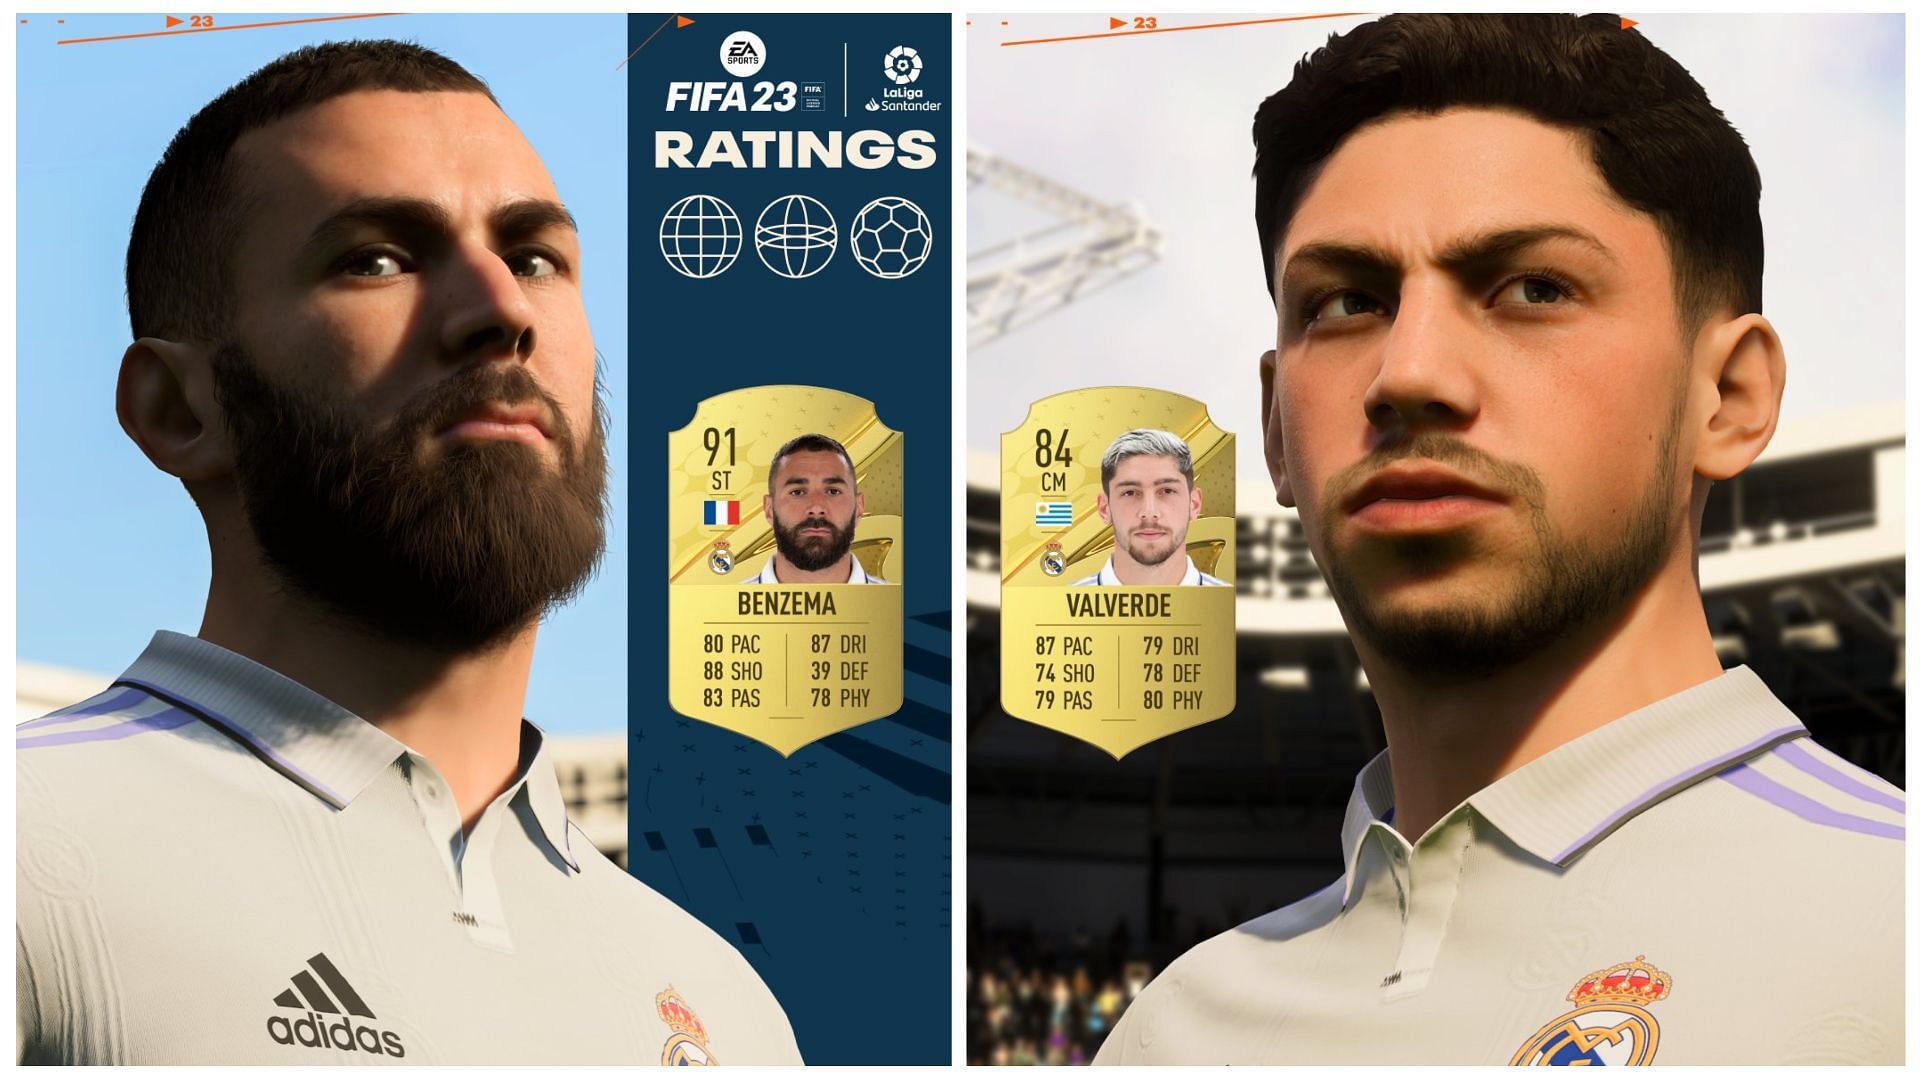 Being lengthy is the talk of the town in the FIFA 23 meta (Images via EA Sports)